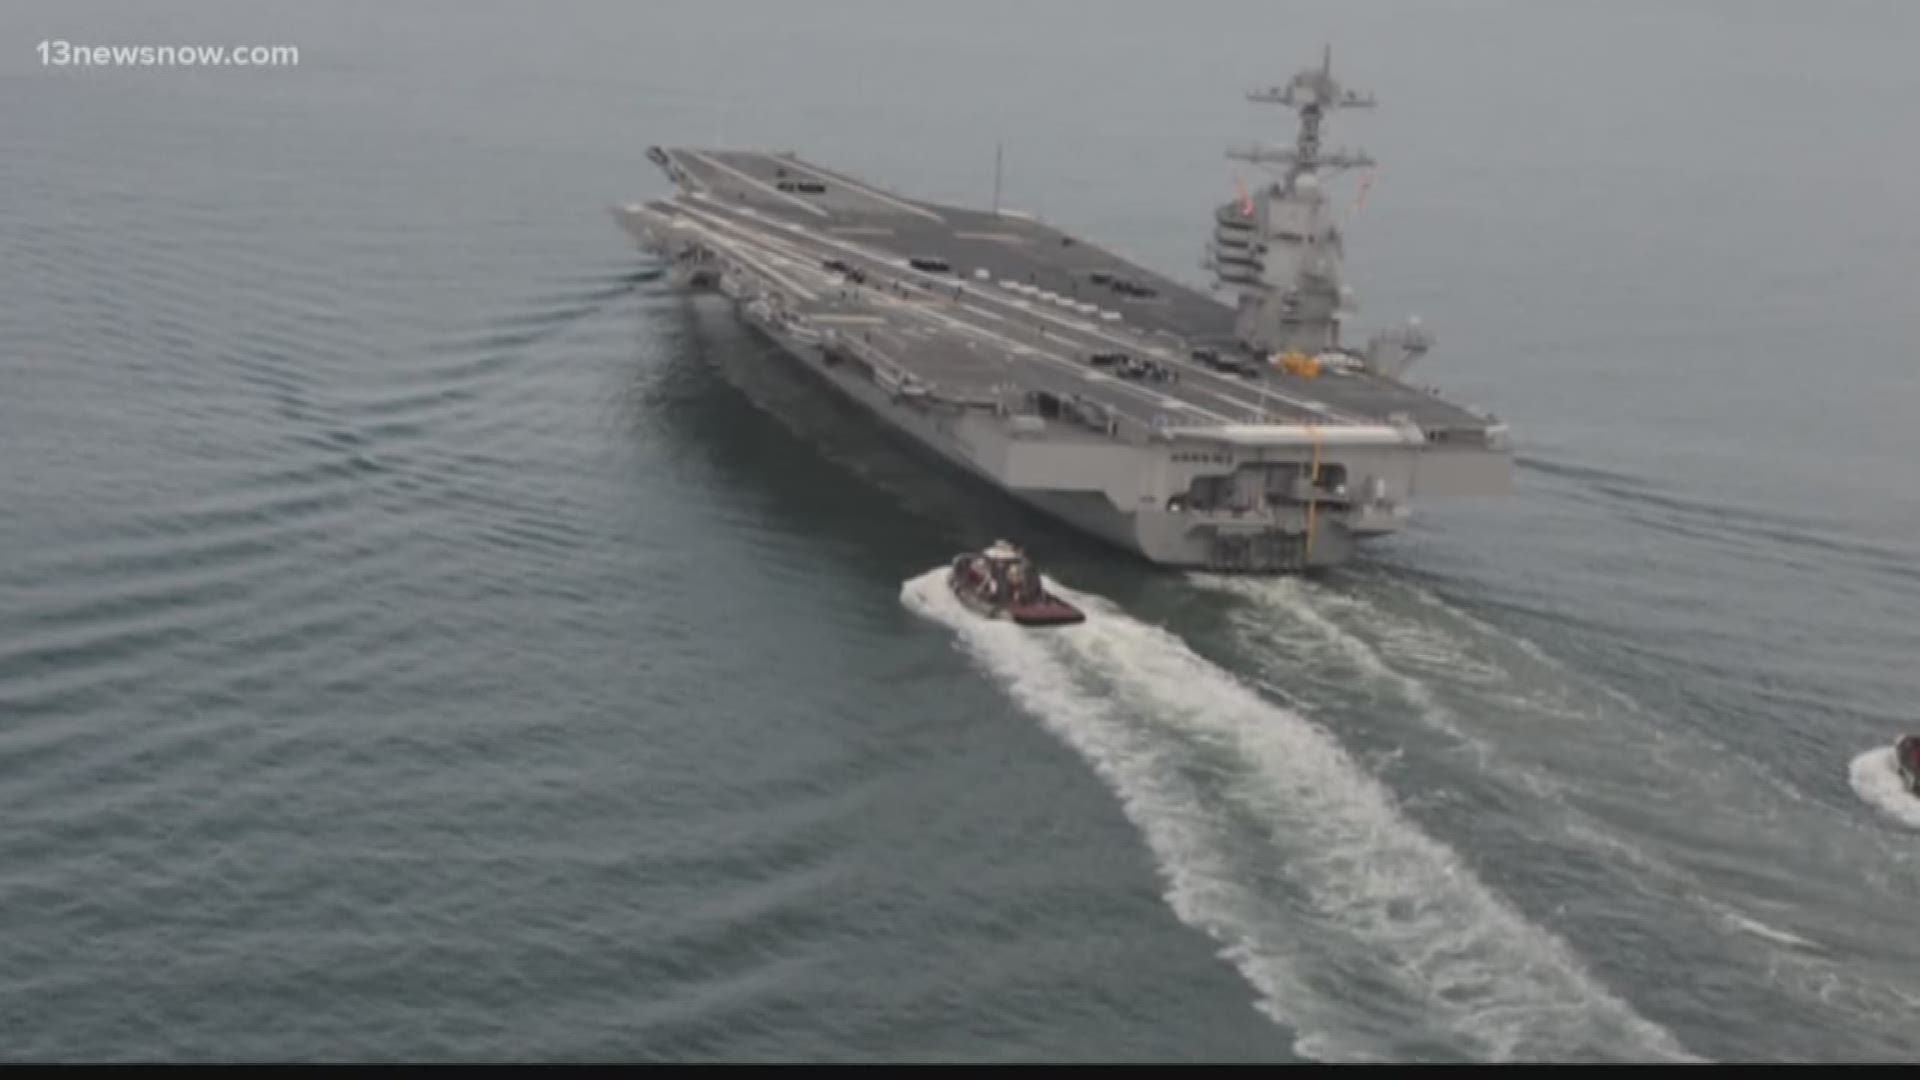 The Commander in Chief is again questioning technology used on the Norfolk-based USS Gerald R. Ford.